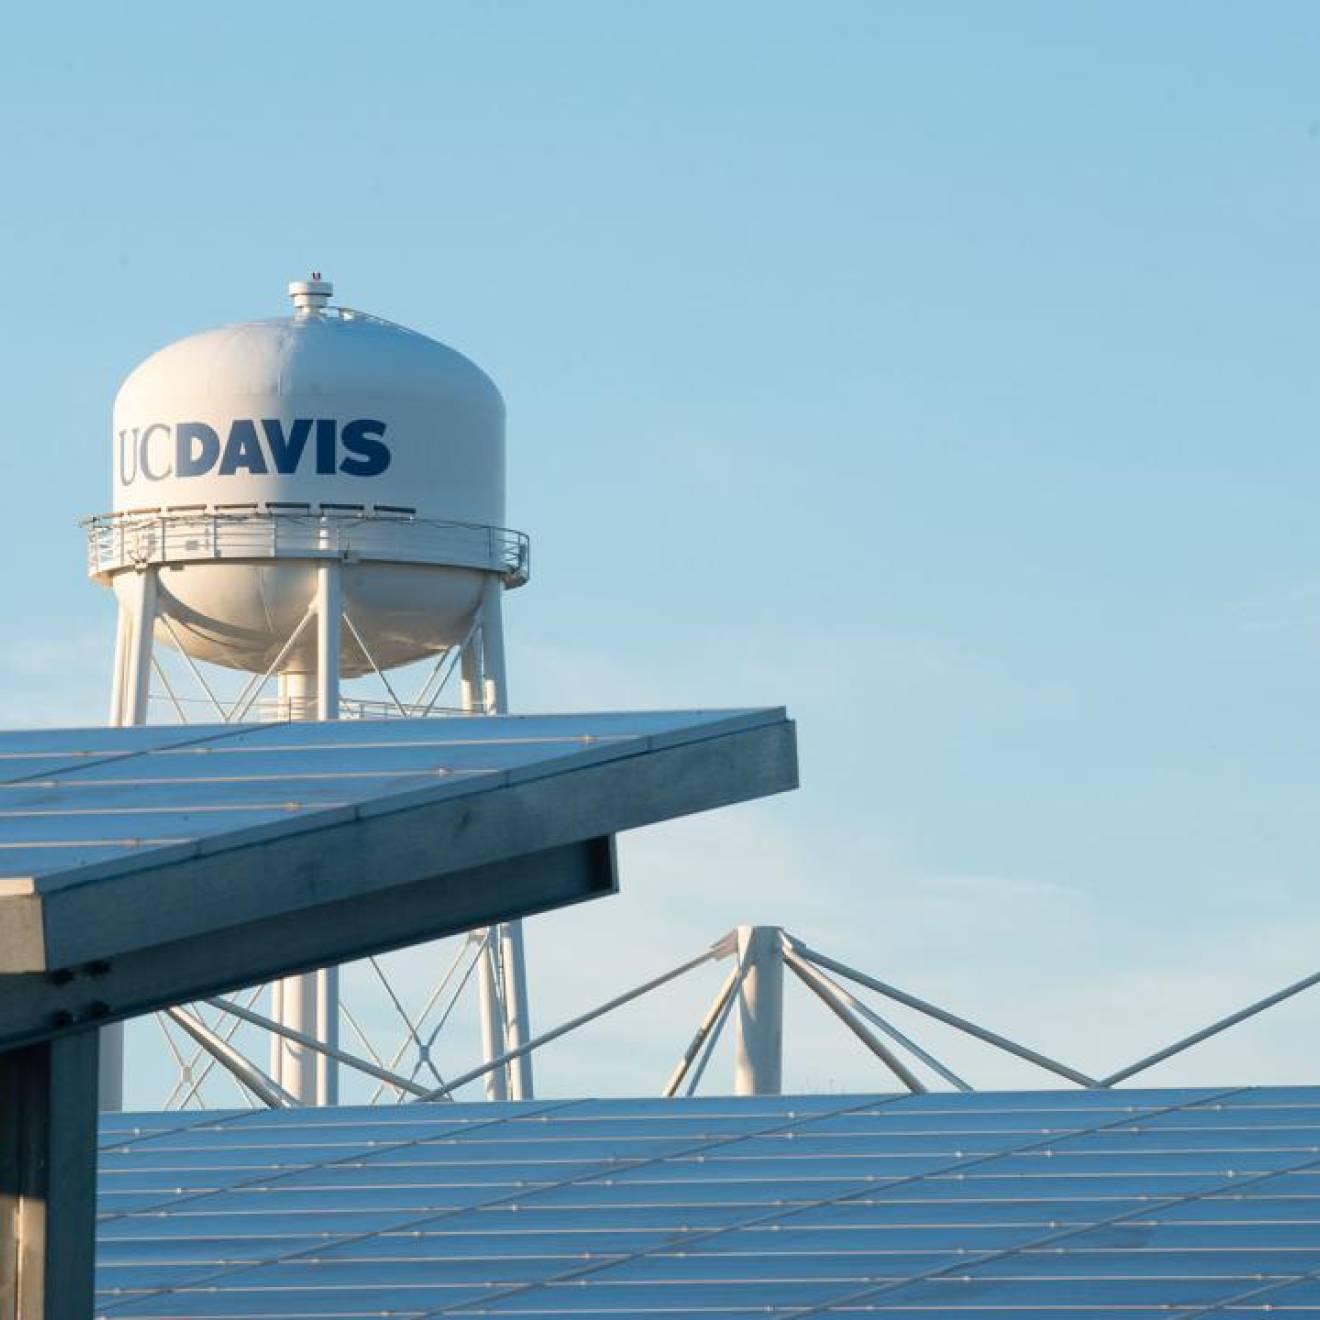 UC Davis water tower with solar panels in front